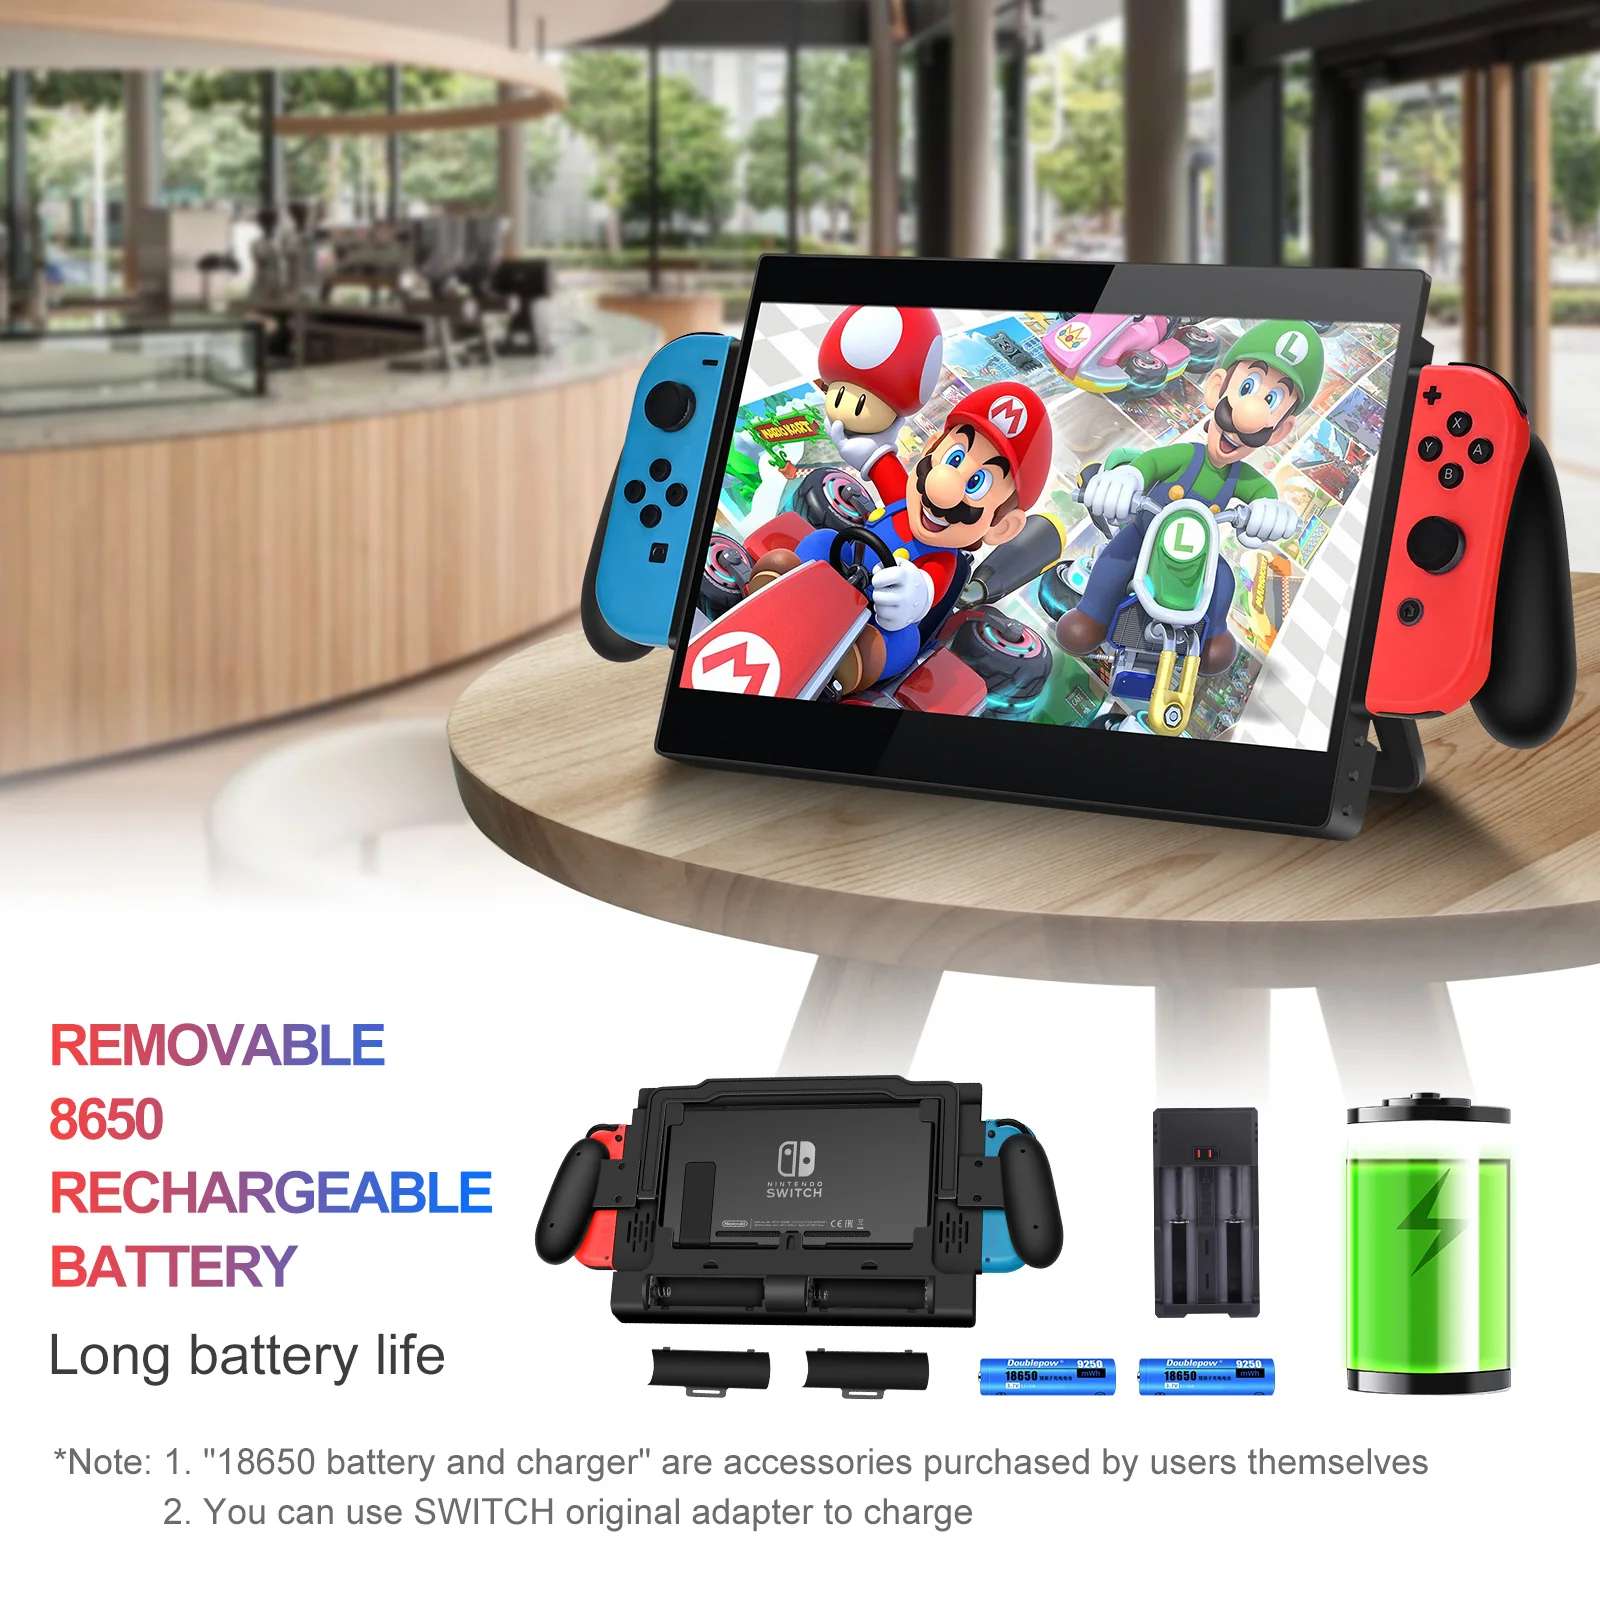 G-STORY 10.1' Integrated LED Monitor for Nintendo Switch (GS101NT)